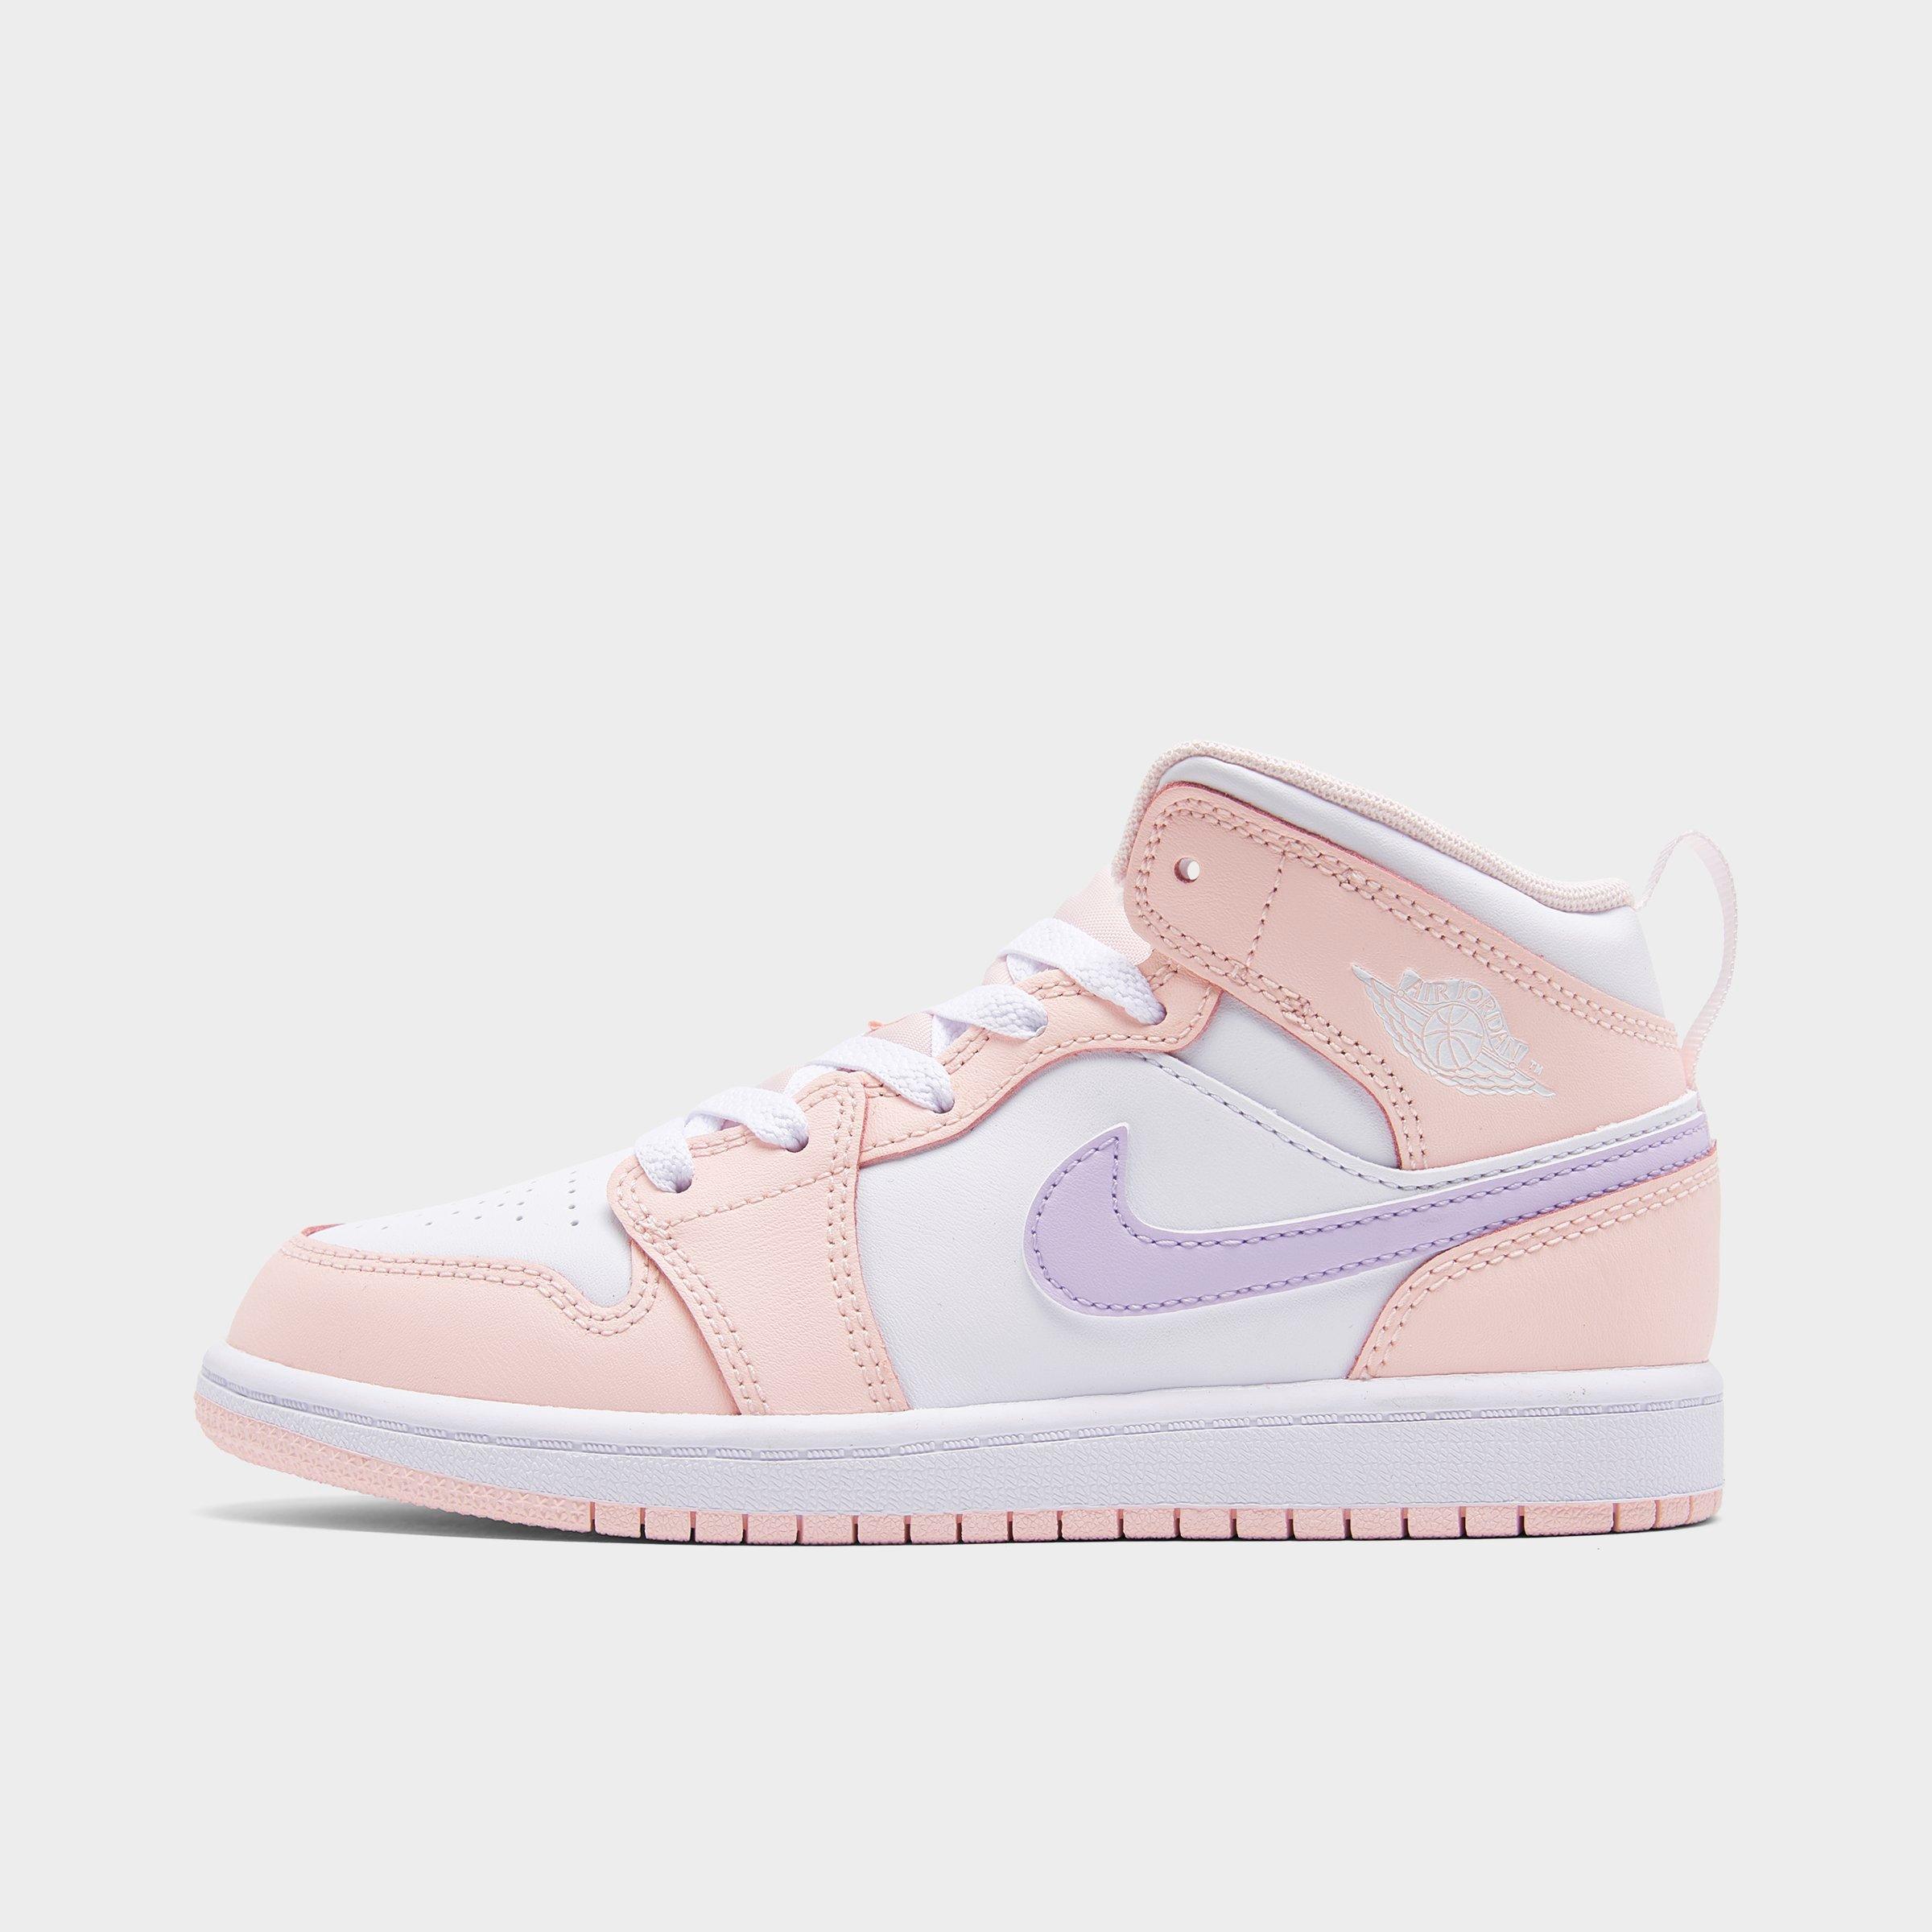 Nike Girls' Little Kids' Air Jordan Retro 1 Mid Casual Shoes In Pink Wash/white/violet Frost